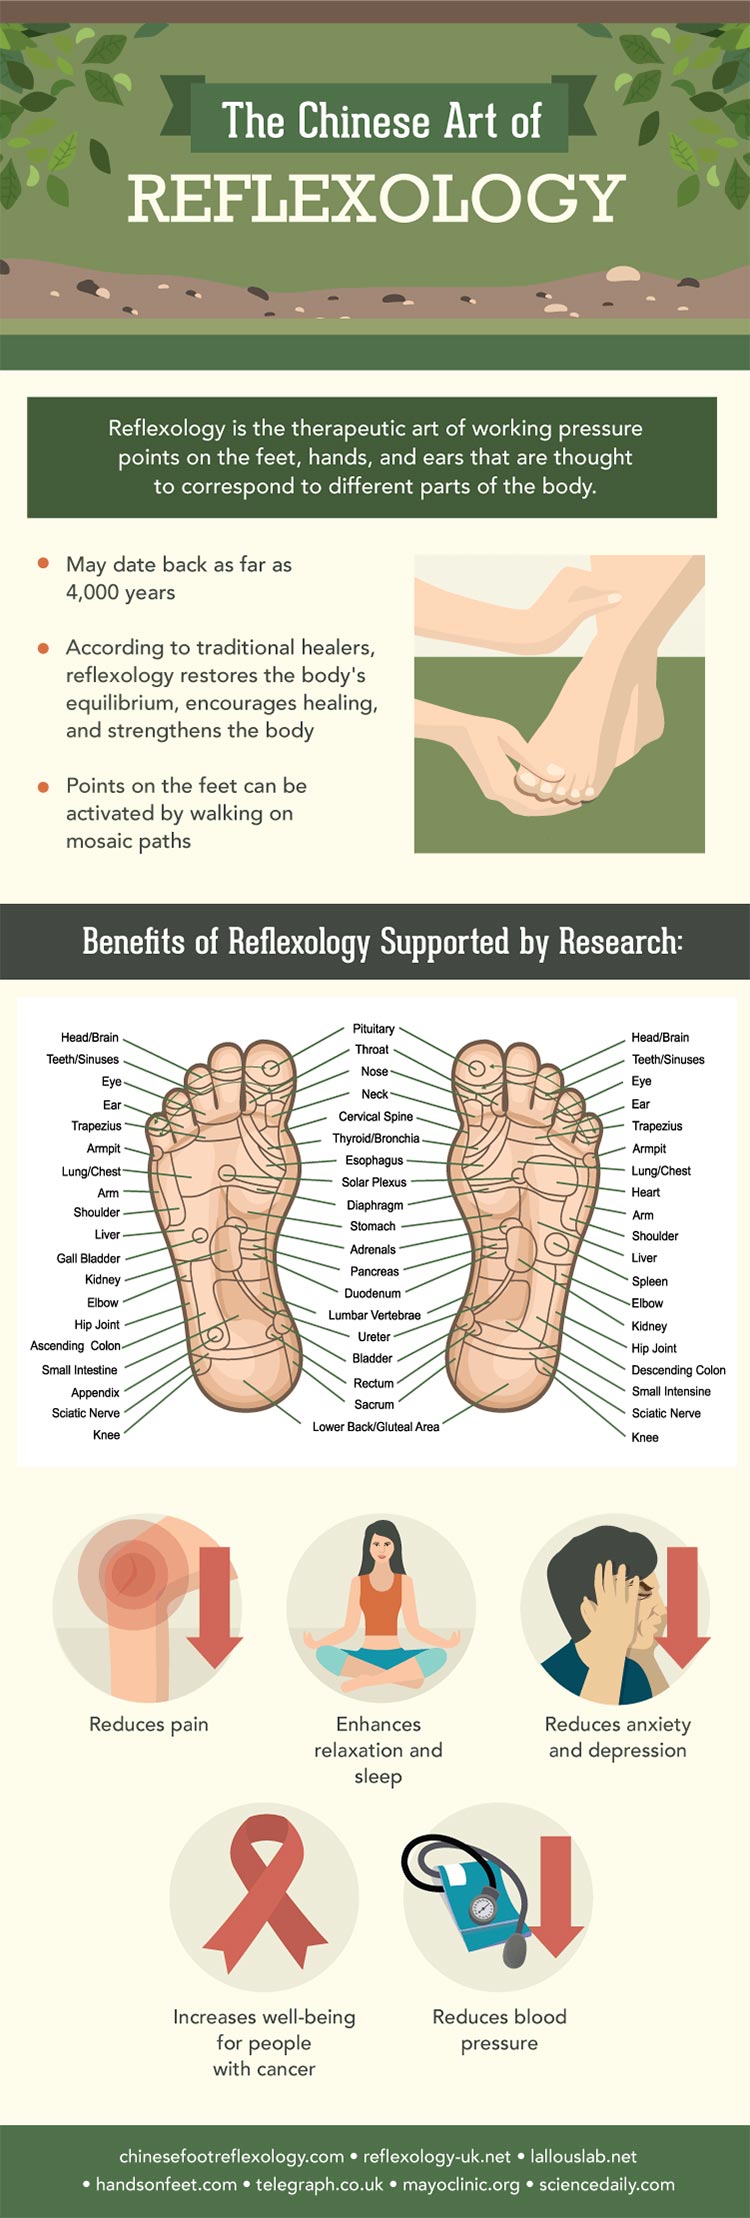 Chinese Art of Reflexology, University Foot and Ankle Institute 